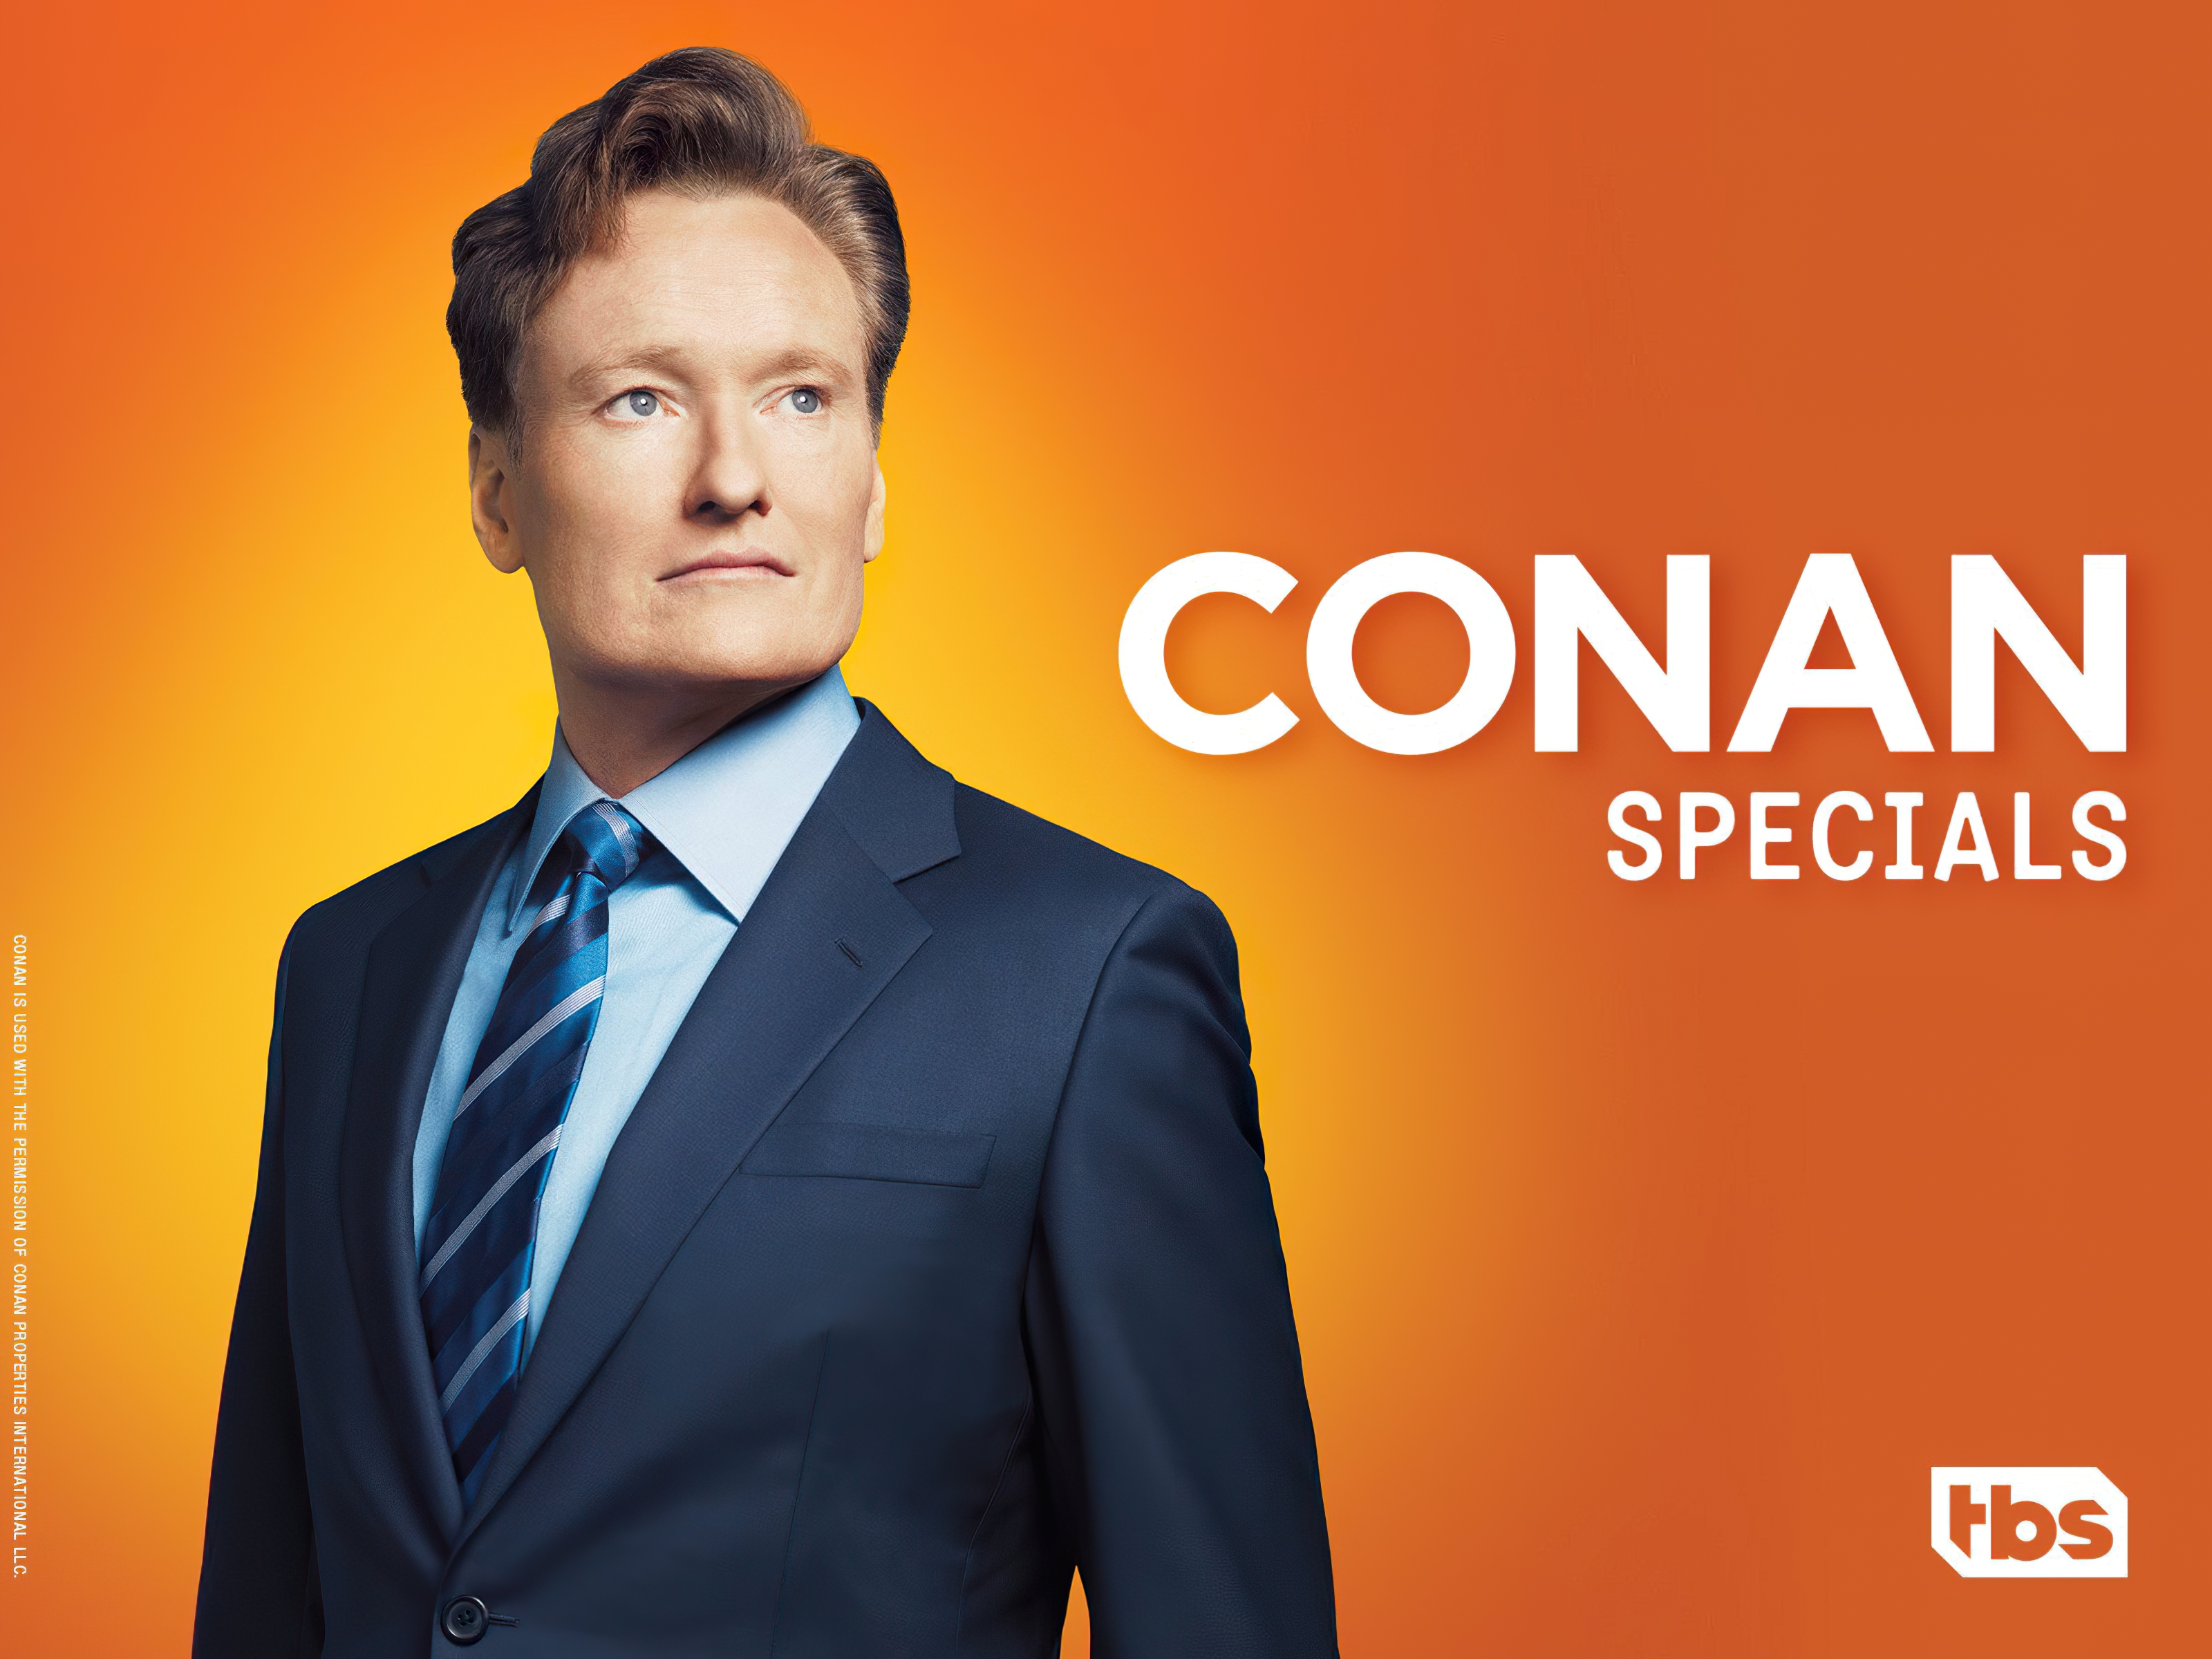 HD desktop wallpaper featuring a promotional image for Conan specials with a distinguished man in a dark suit on an orange background.